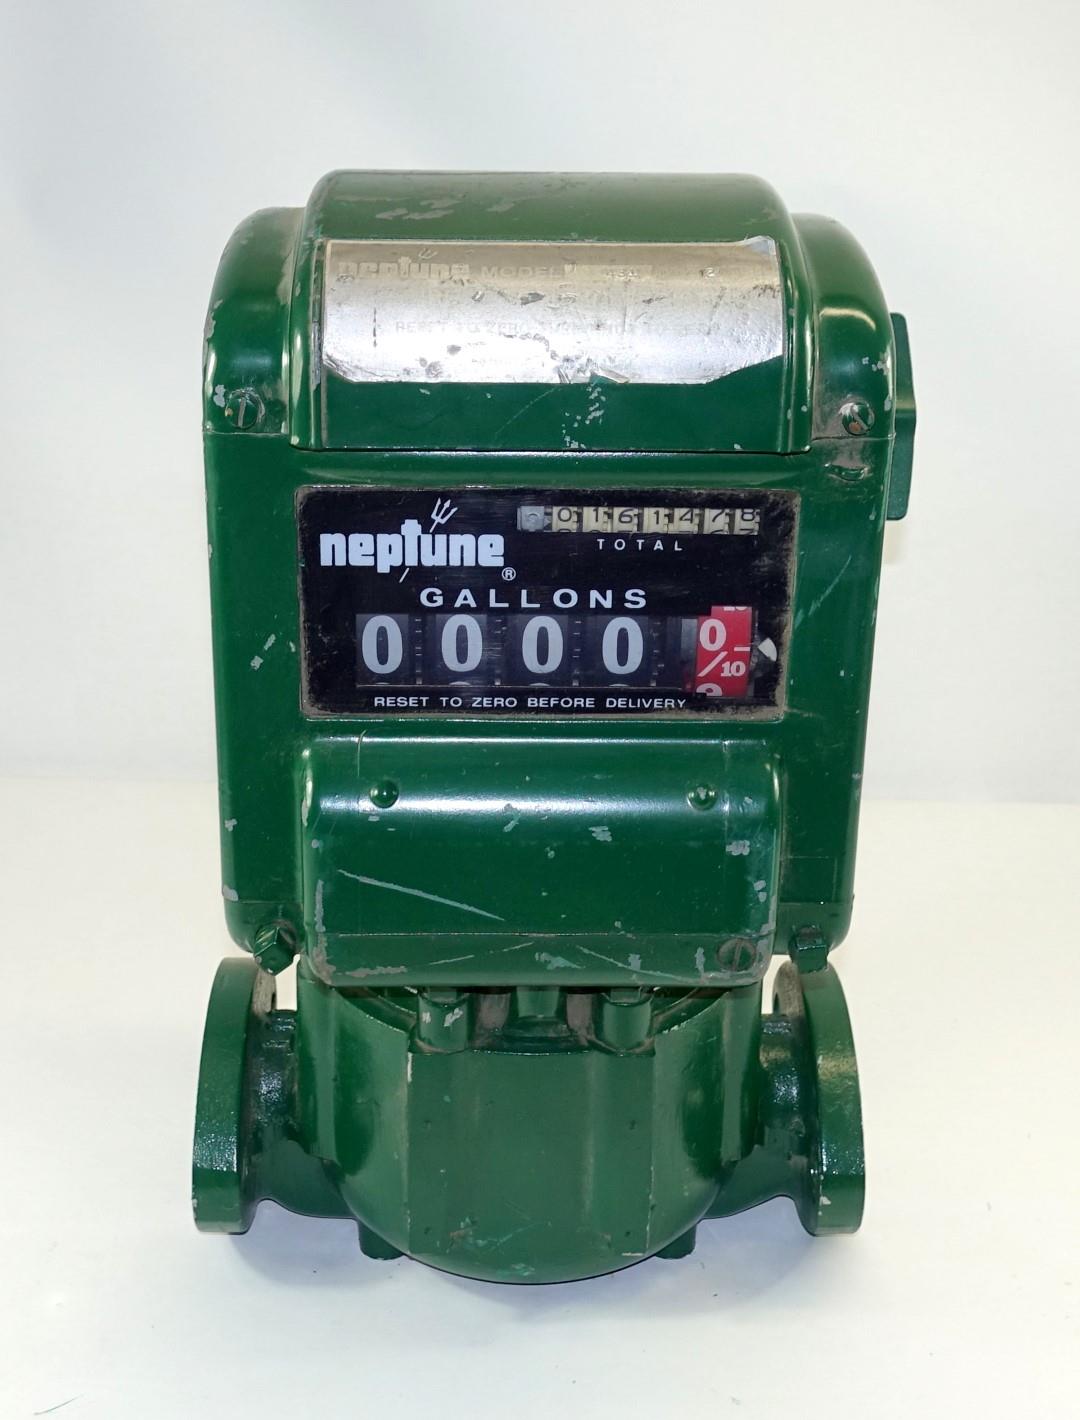 M35-668 | 6680-00-930-5955 Neptune Fuel Meter Model 431 for M49A2C Fuel Truck USED (3).JPG